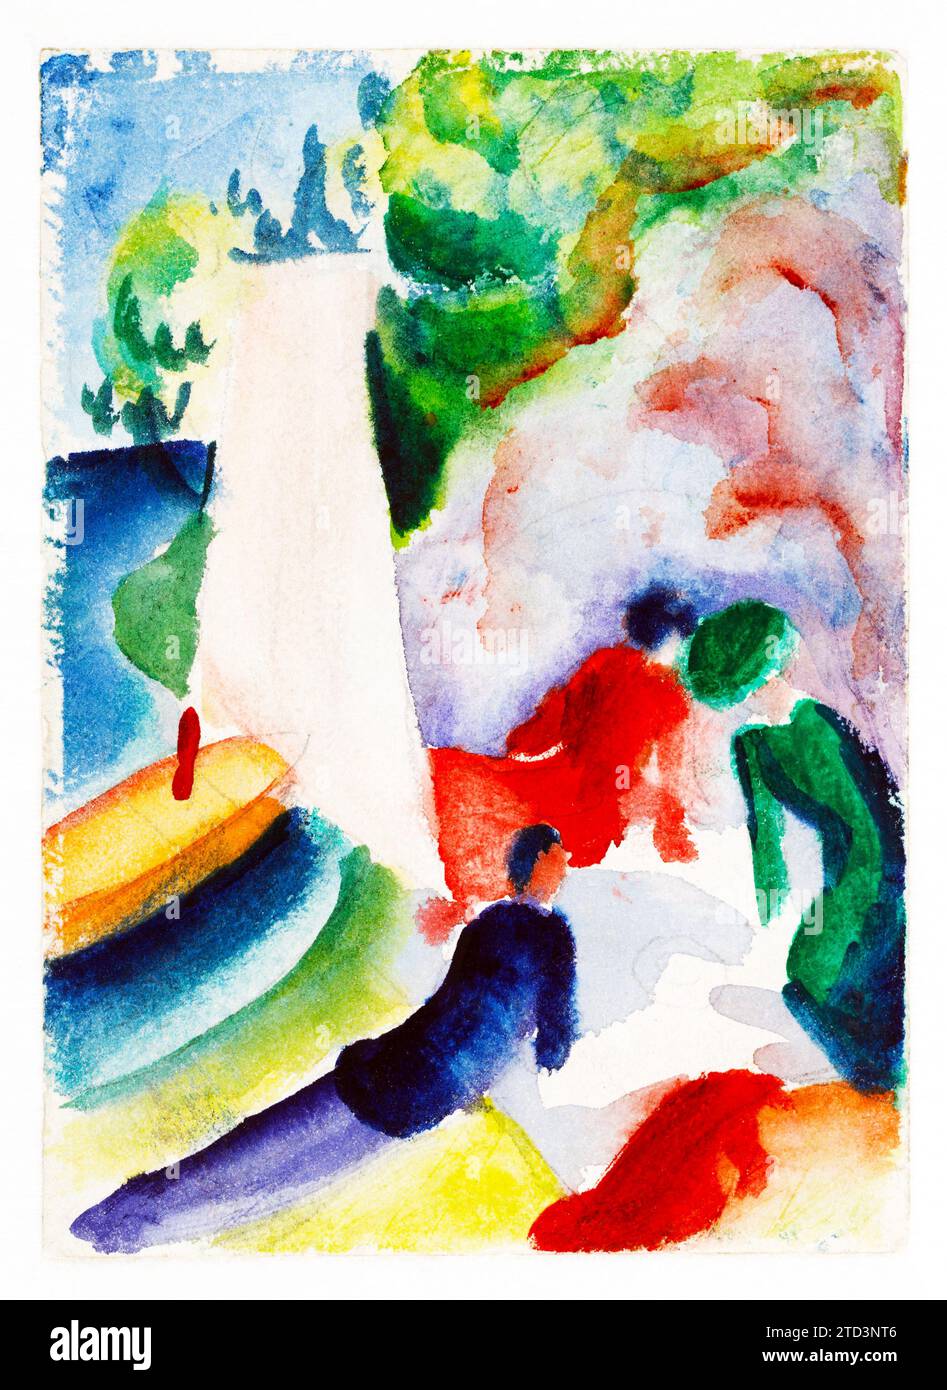 August Macke's Picnic on the Beach famous painting. Original from Wikimedia Commons. Stock Photo